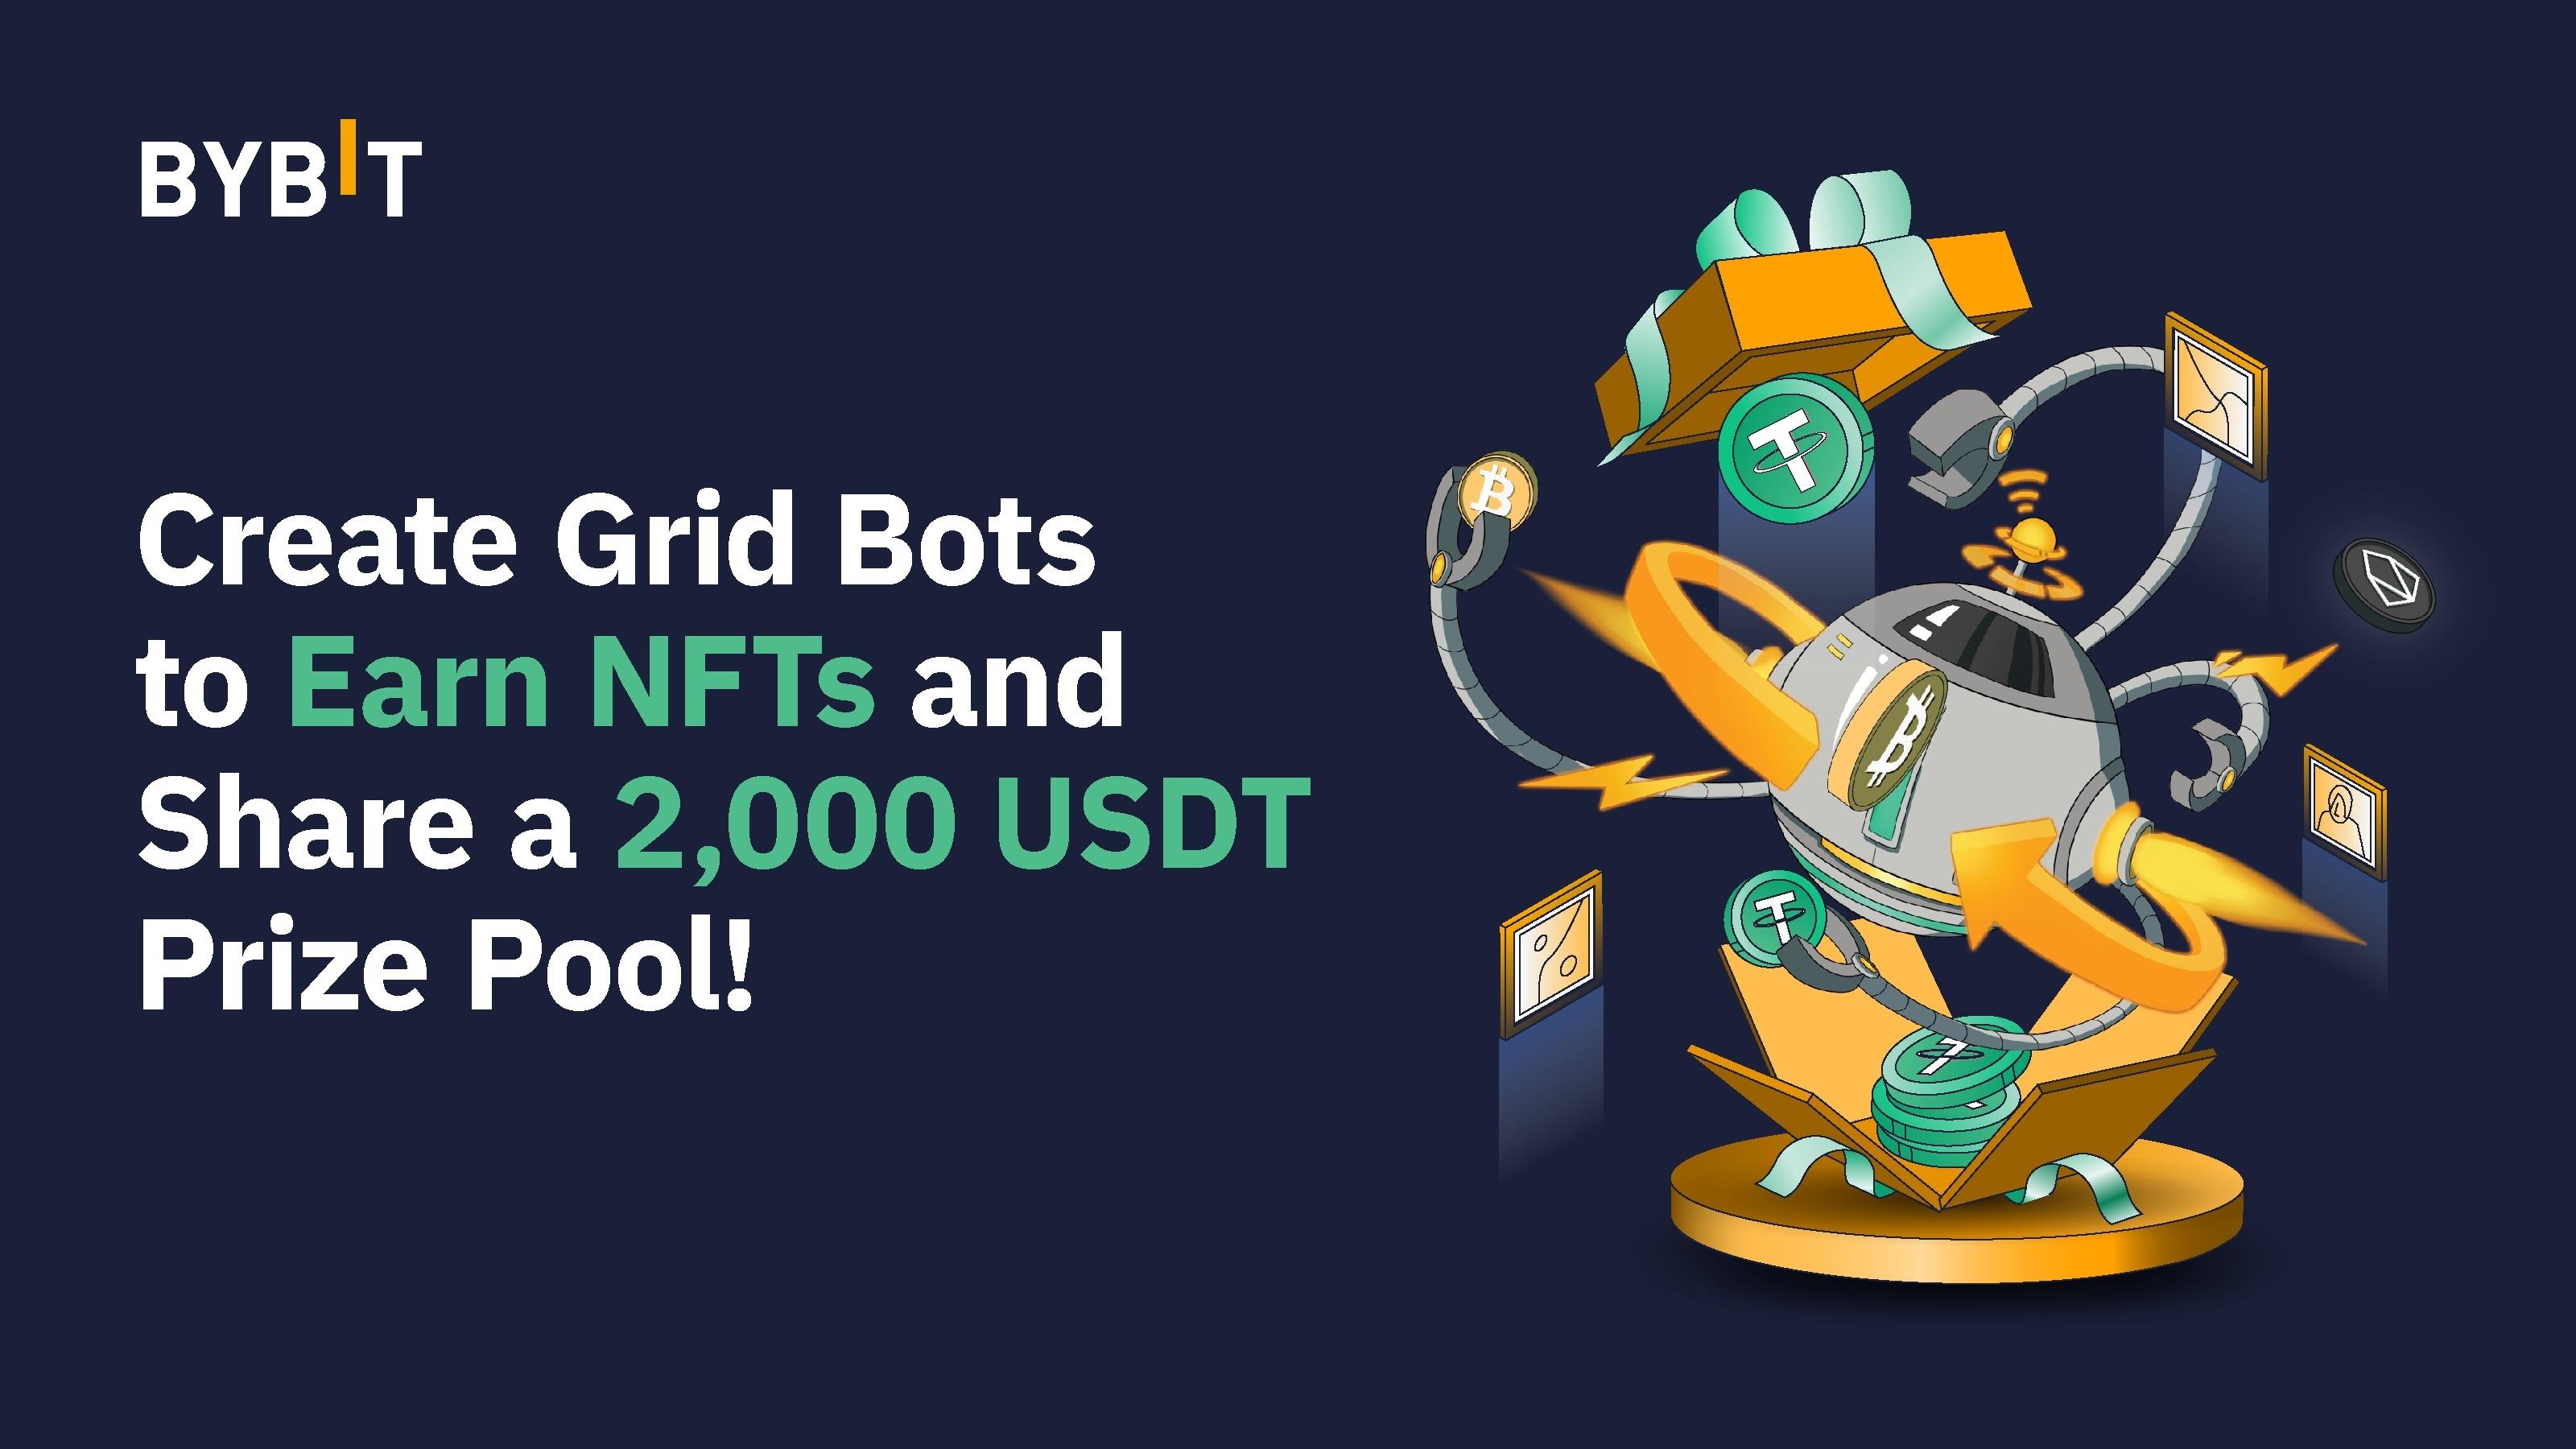 Create Grid Bots to Earn NFTs and Share a 2,000 USDT Prize Pool!